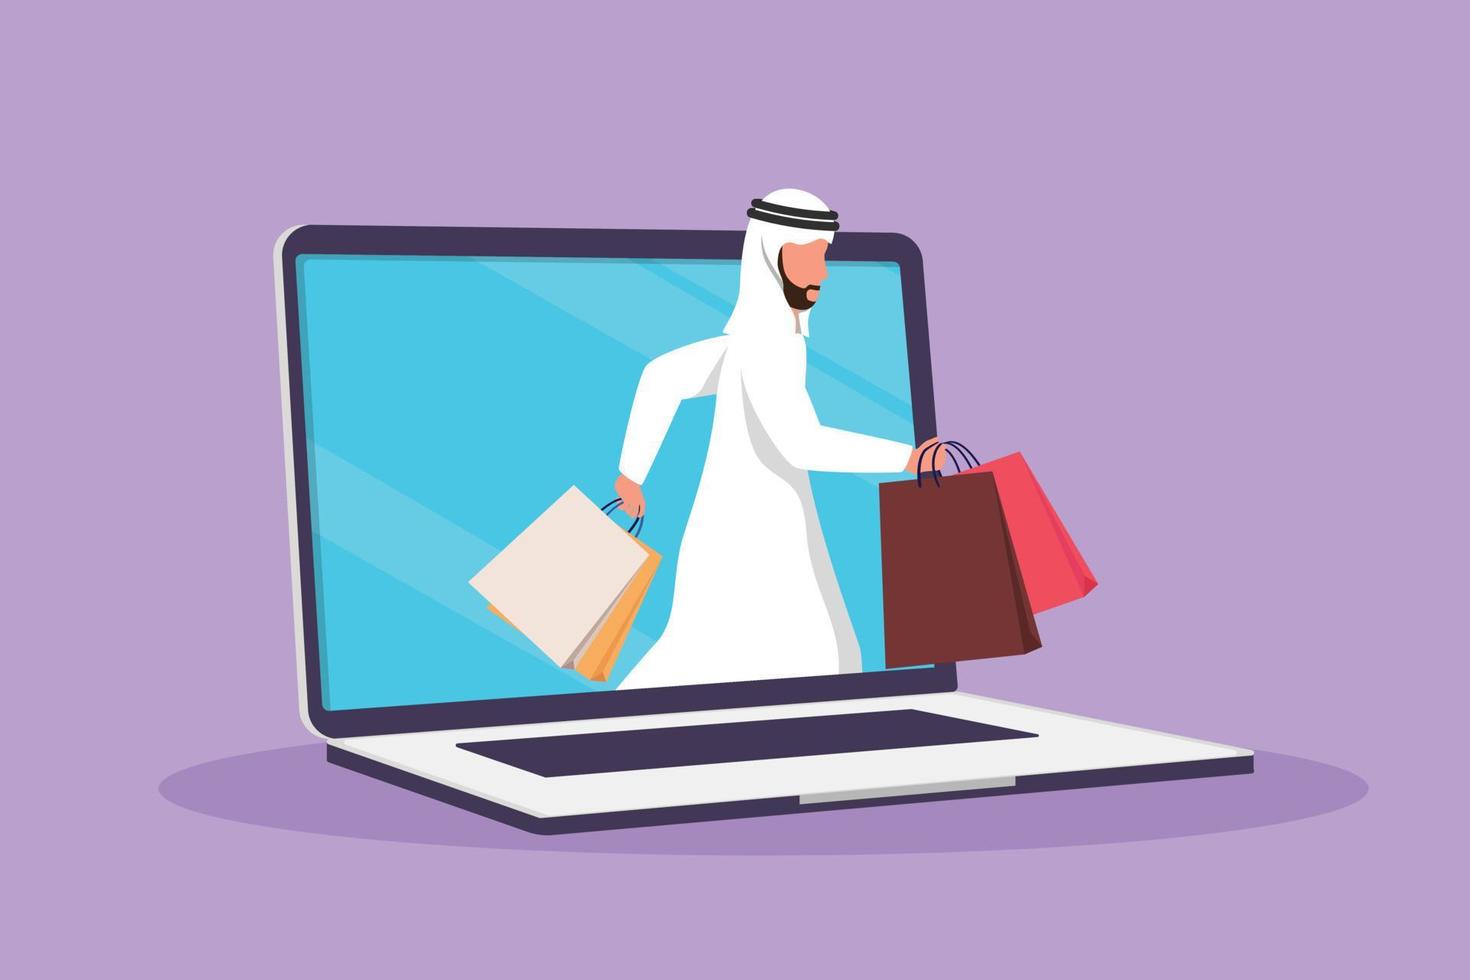 Graphic flat design drawing Arab man coming out of laptop computer screen with holding shopping bags. Sale, digital lifestyle, consumerism. Online store technology. Cartoon style vector illustration